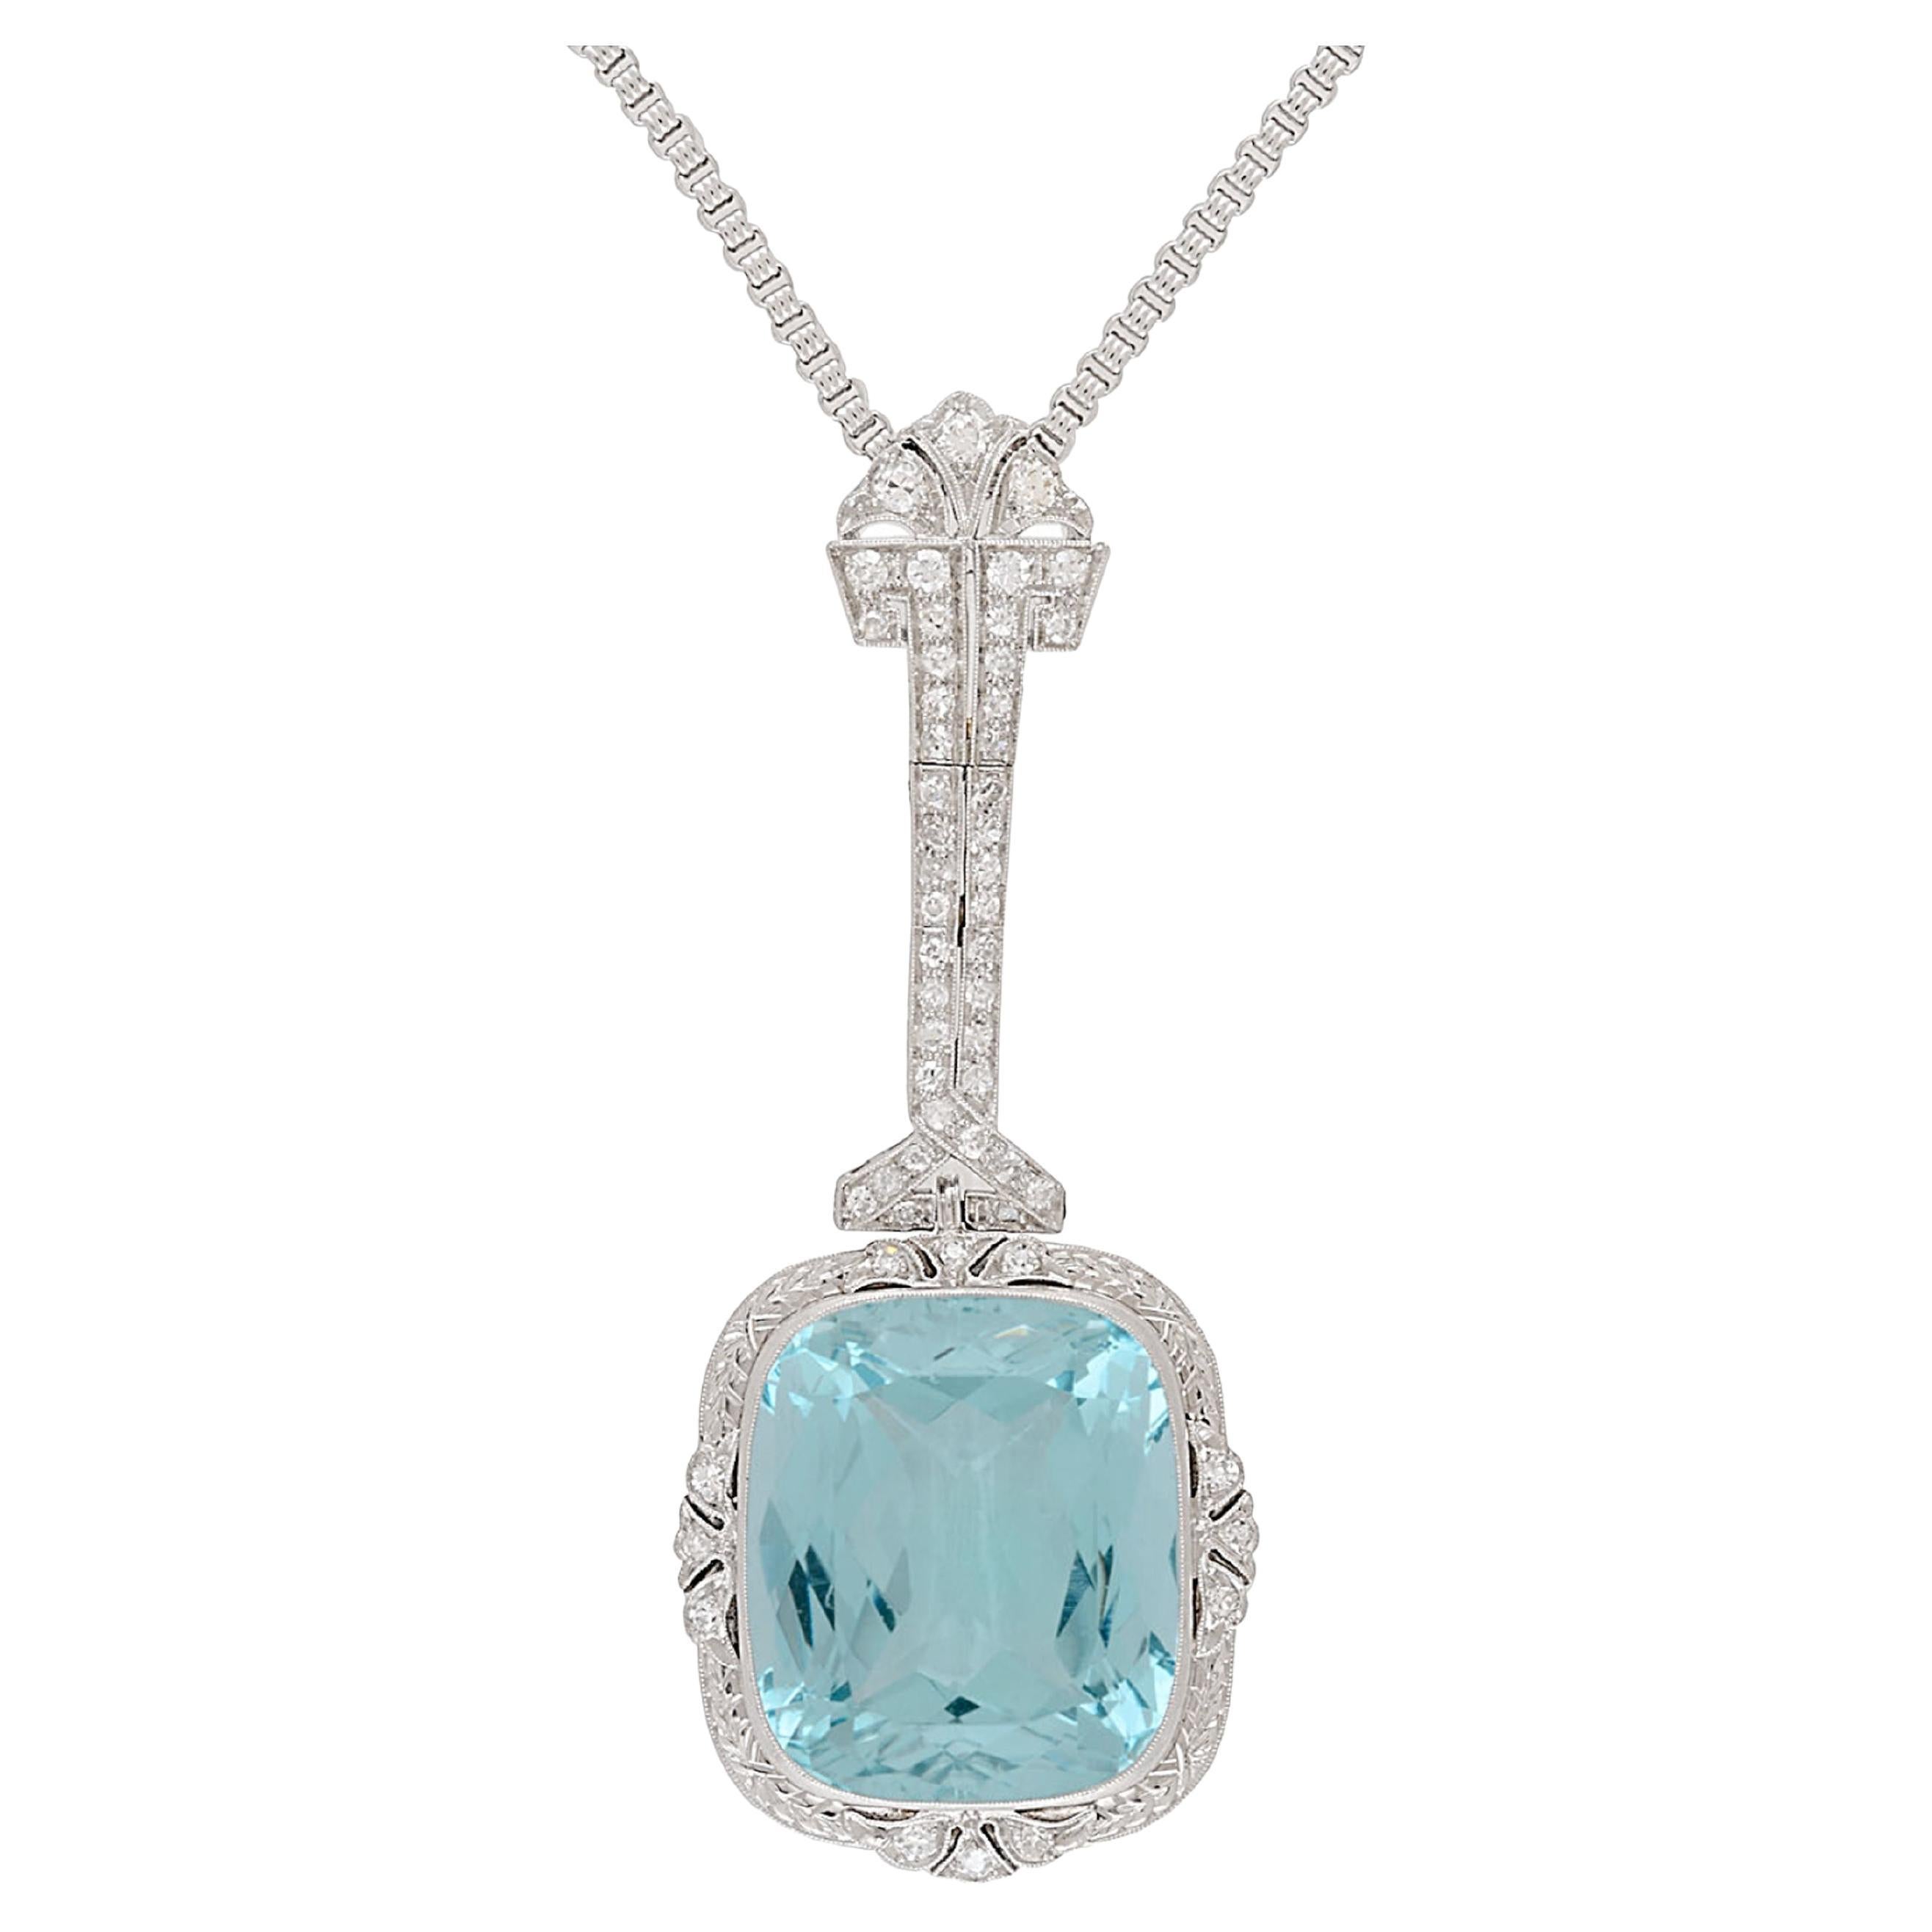 Vintage Art Deco Era GIA Certified Aquamarine and Old Euro Cut Diamond Necklace For Sale